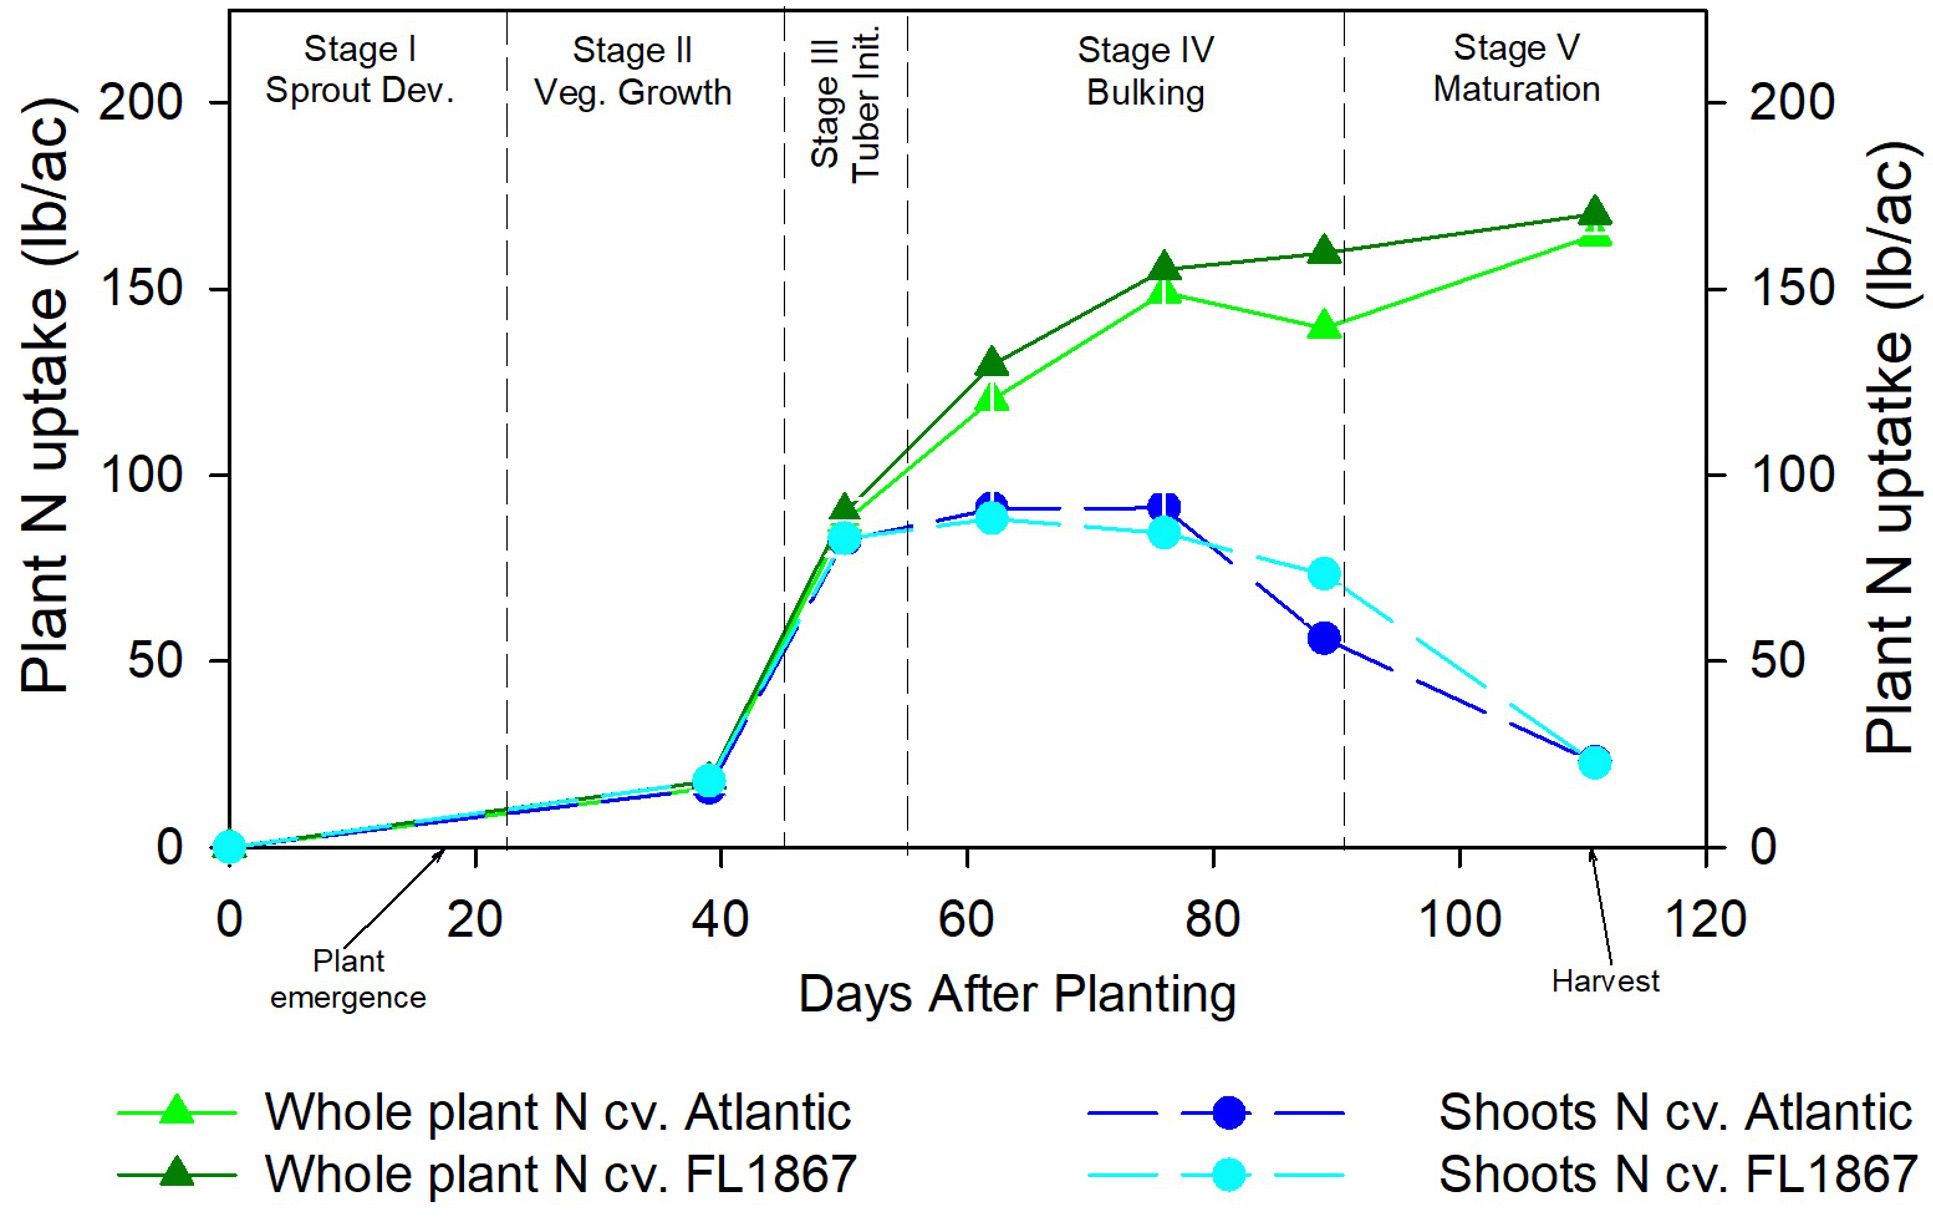 Potato N uptake (lb/acre) in whole plant (shoots and tubers) and aboveground (shoots) of cultivars Atlantic and FL1867 cultivated in Florida. Data source: Rens et al. (2016). 